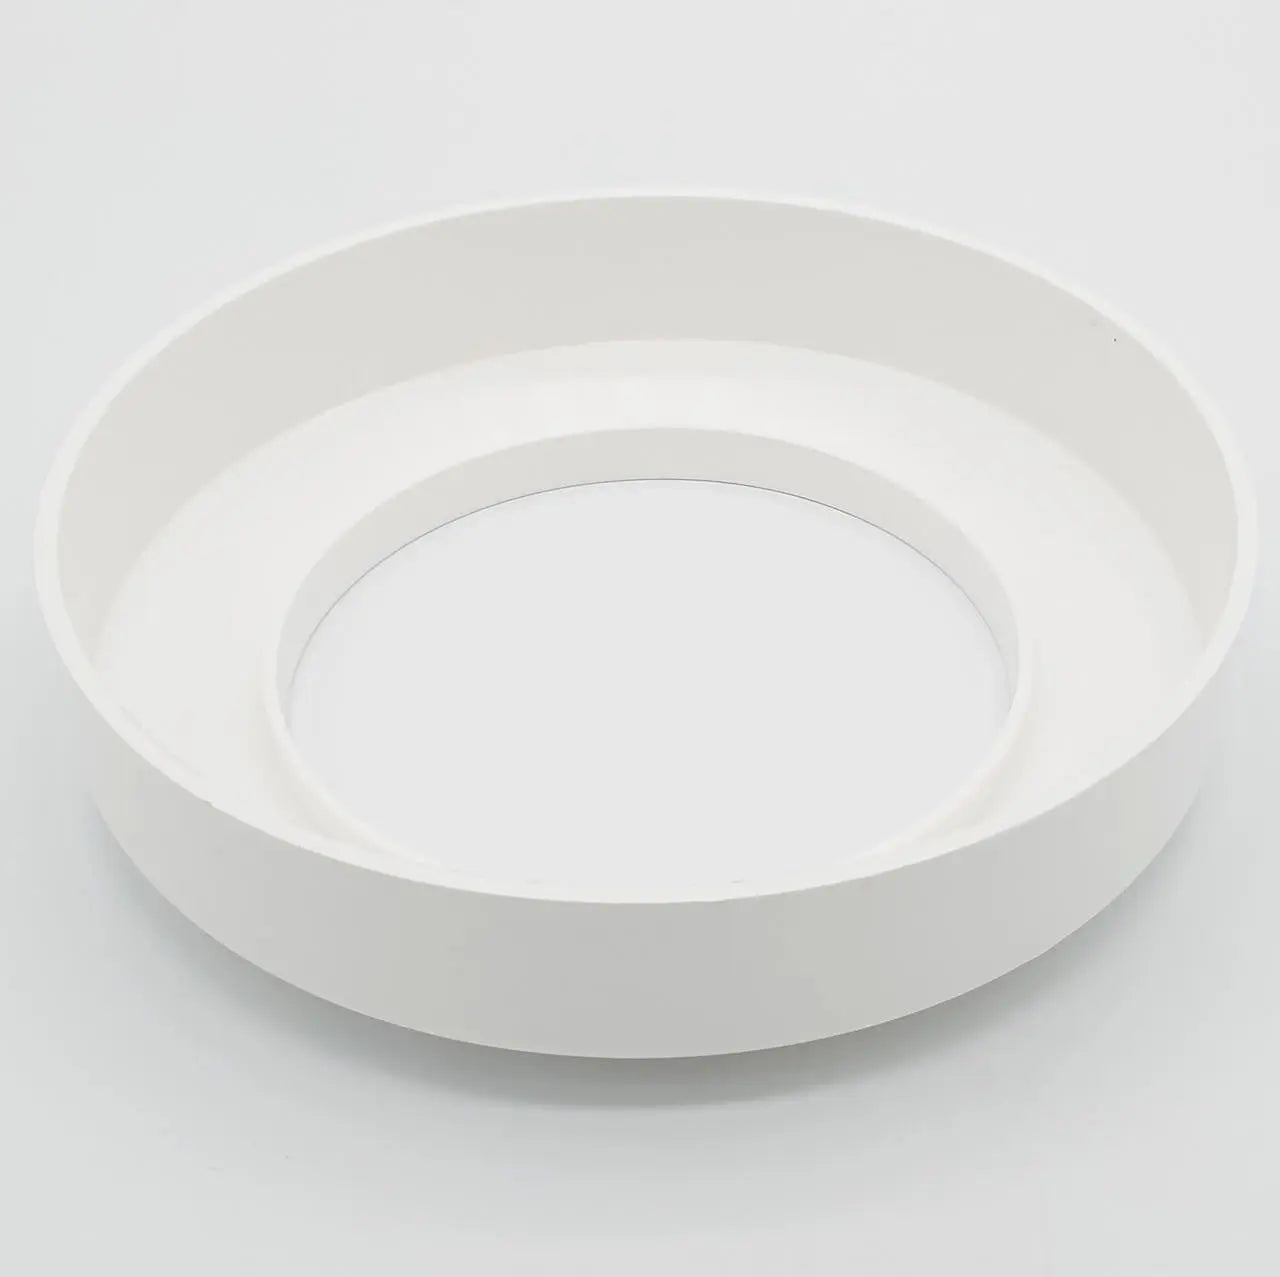 110mm Soil Toilet Pipe Cover Collar White Wall Cover - Toilet Waste Pipe